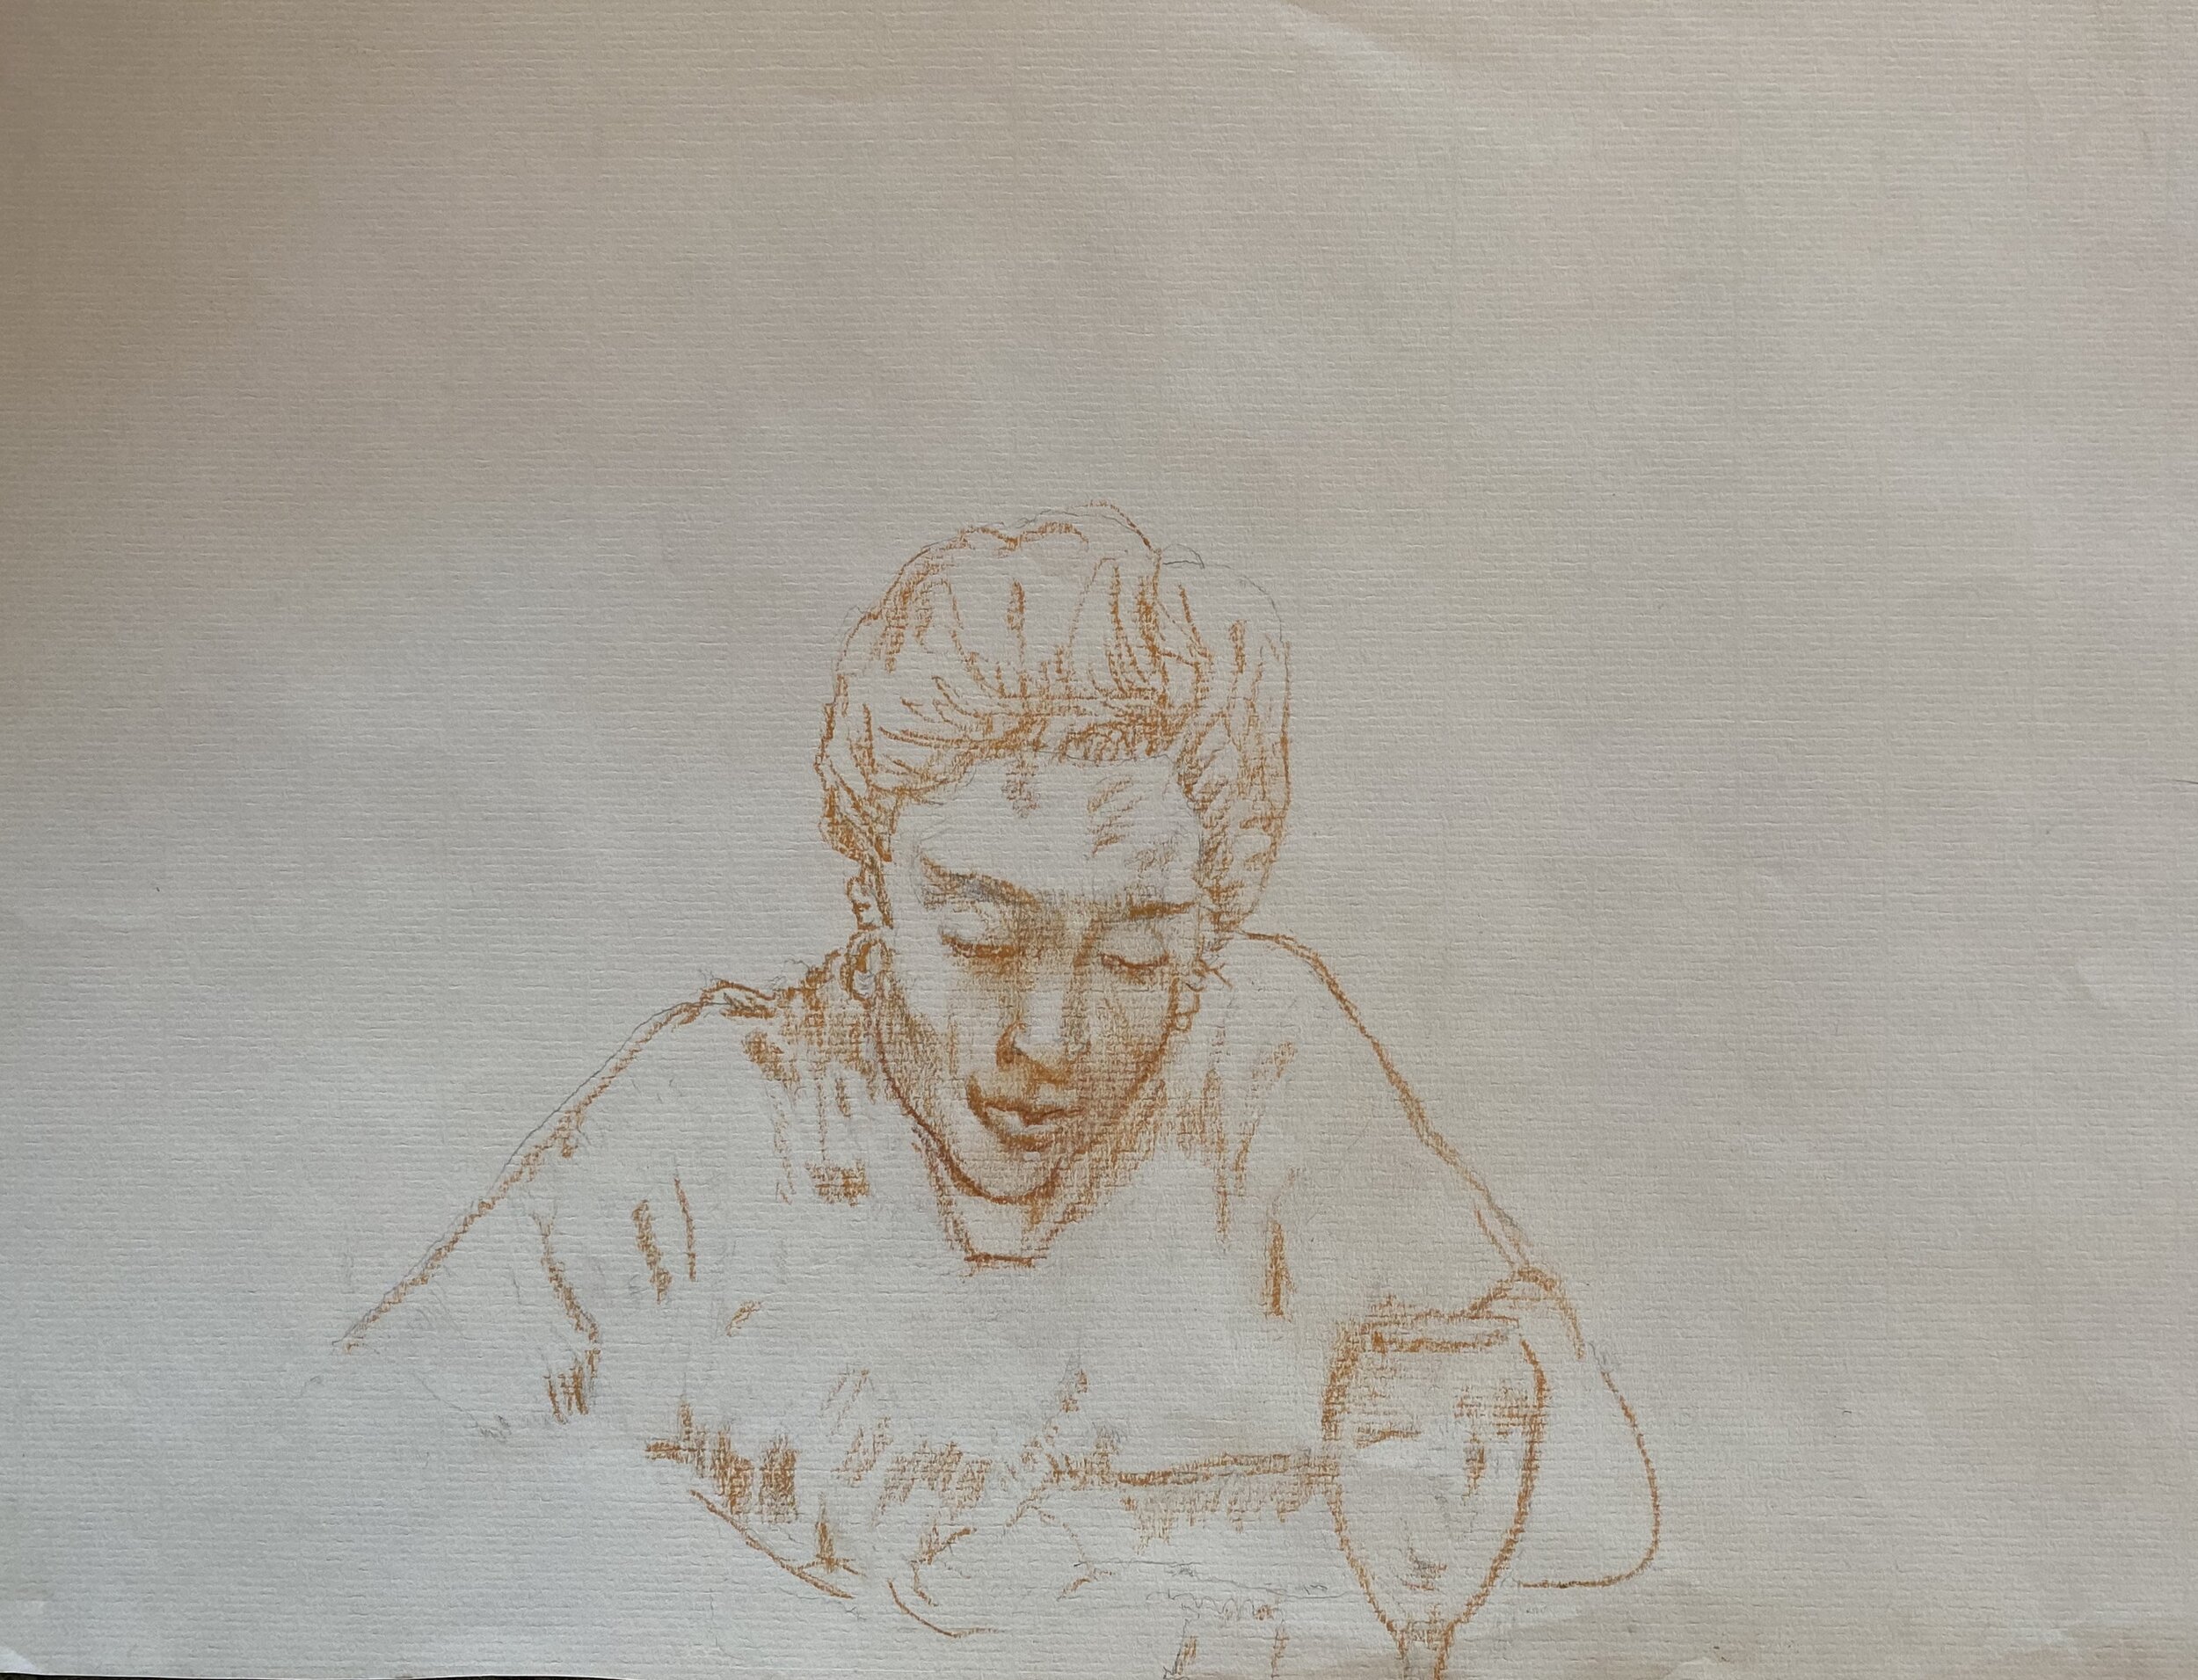   Description:  Woman having a meal   Medium:  Pastel pencil on paper   Dimensions:    H: 12 in W: 18 in 